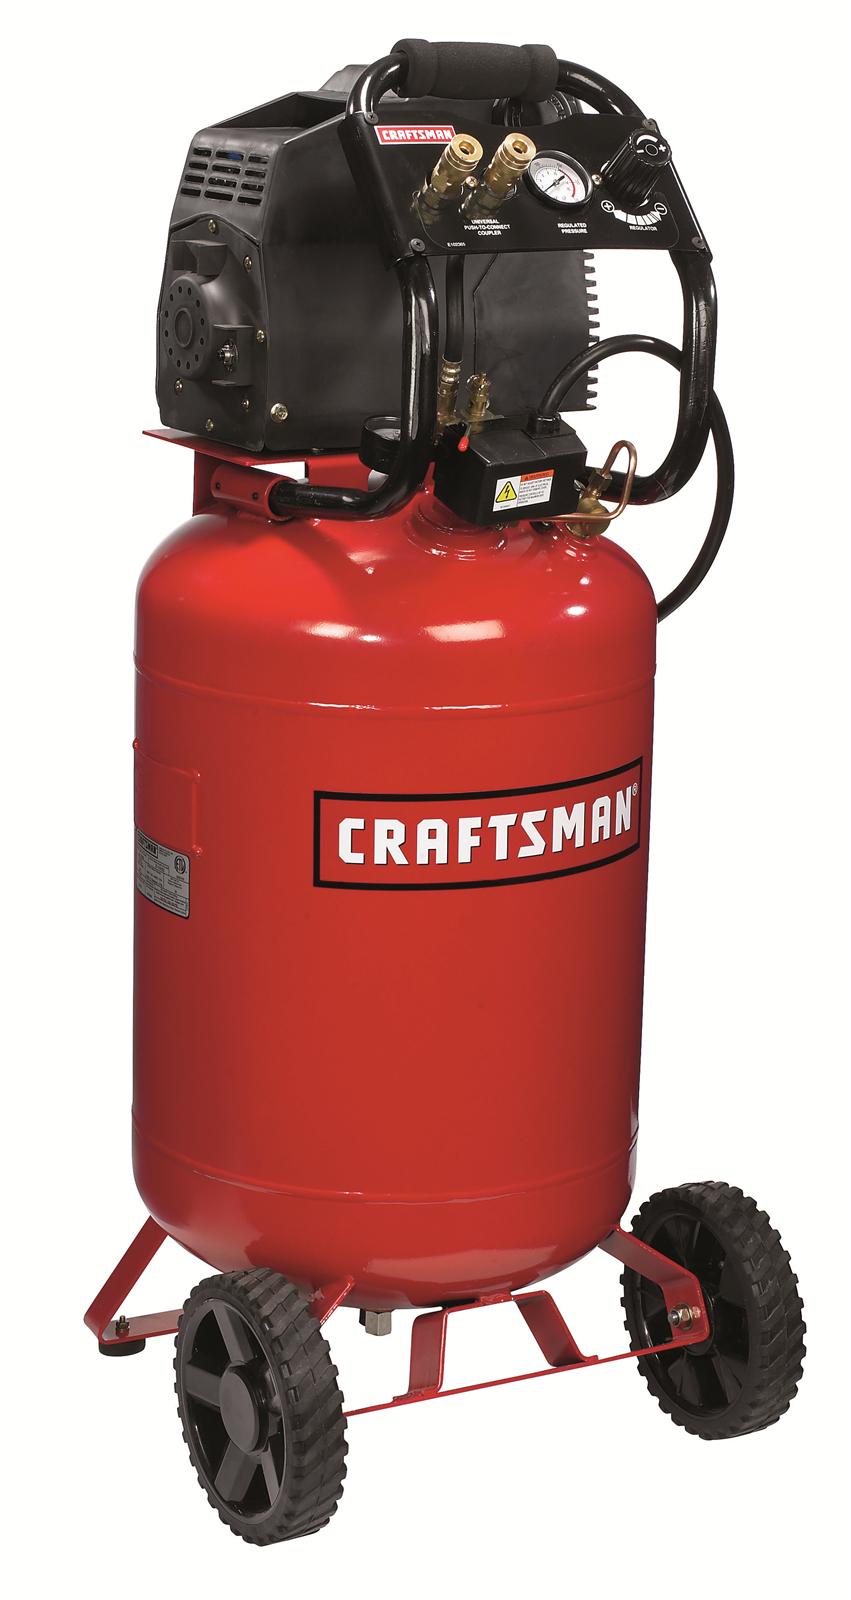 CRAFTSMAN 60-Gallons 175 PSI Vertical Air Compressor with